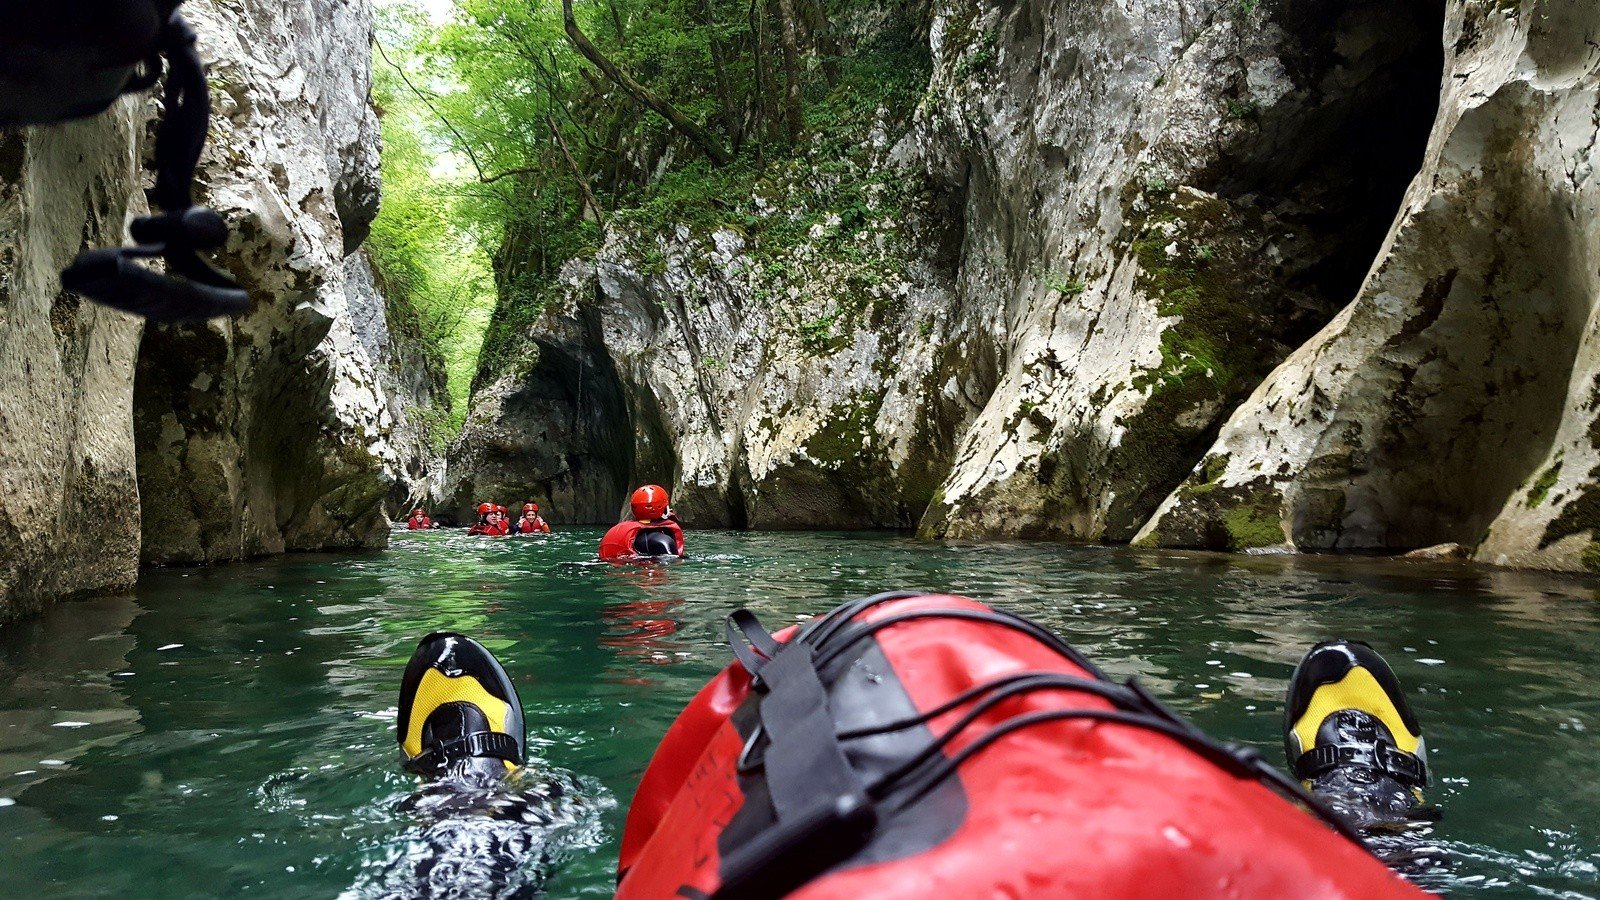 Canyoning: What is Canyoning?